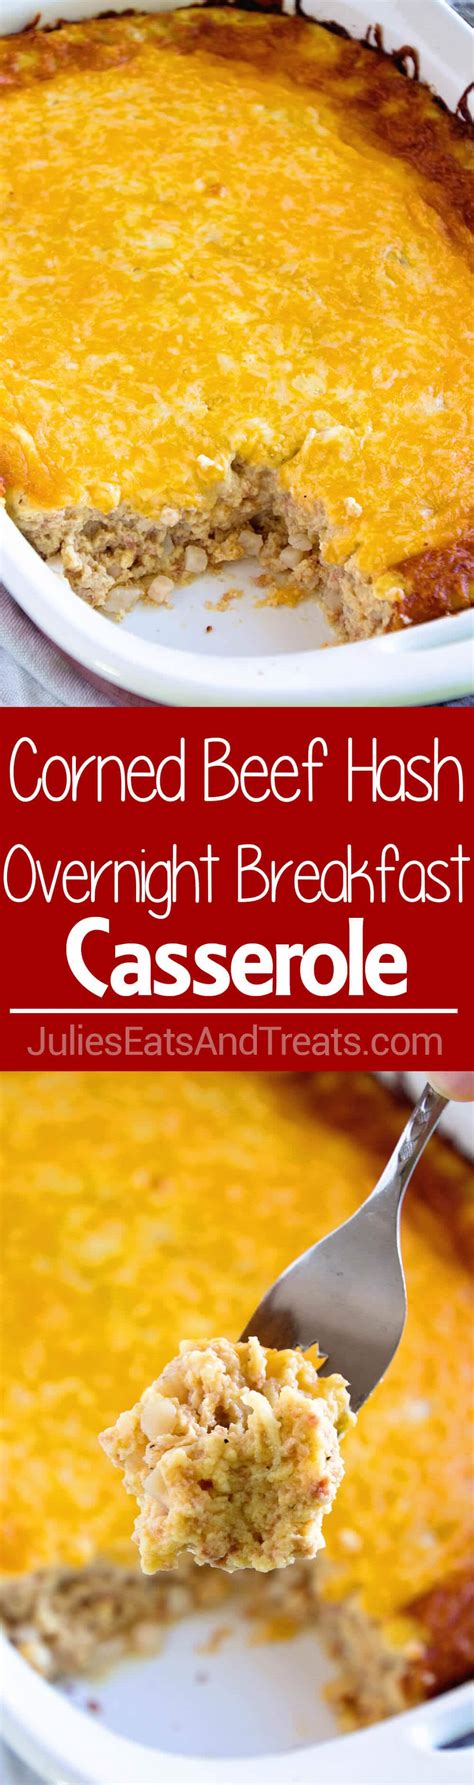 If you don't have 1 cup add use your favorite mashed potato recipe; Corned Beef Hash Overnight Breakfast Casserole - Julie's Eats & Treats